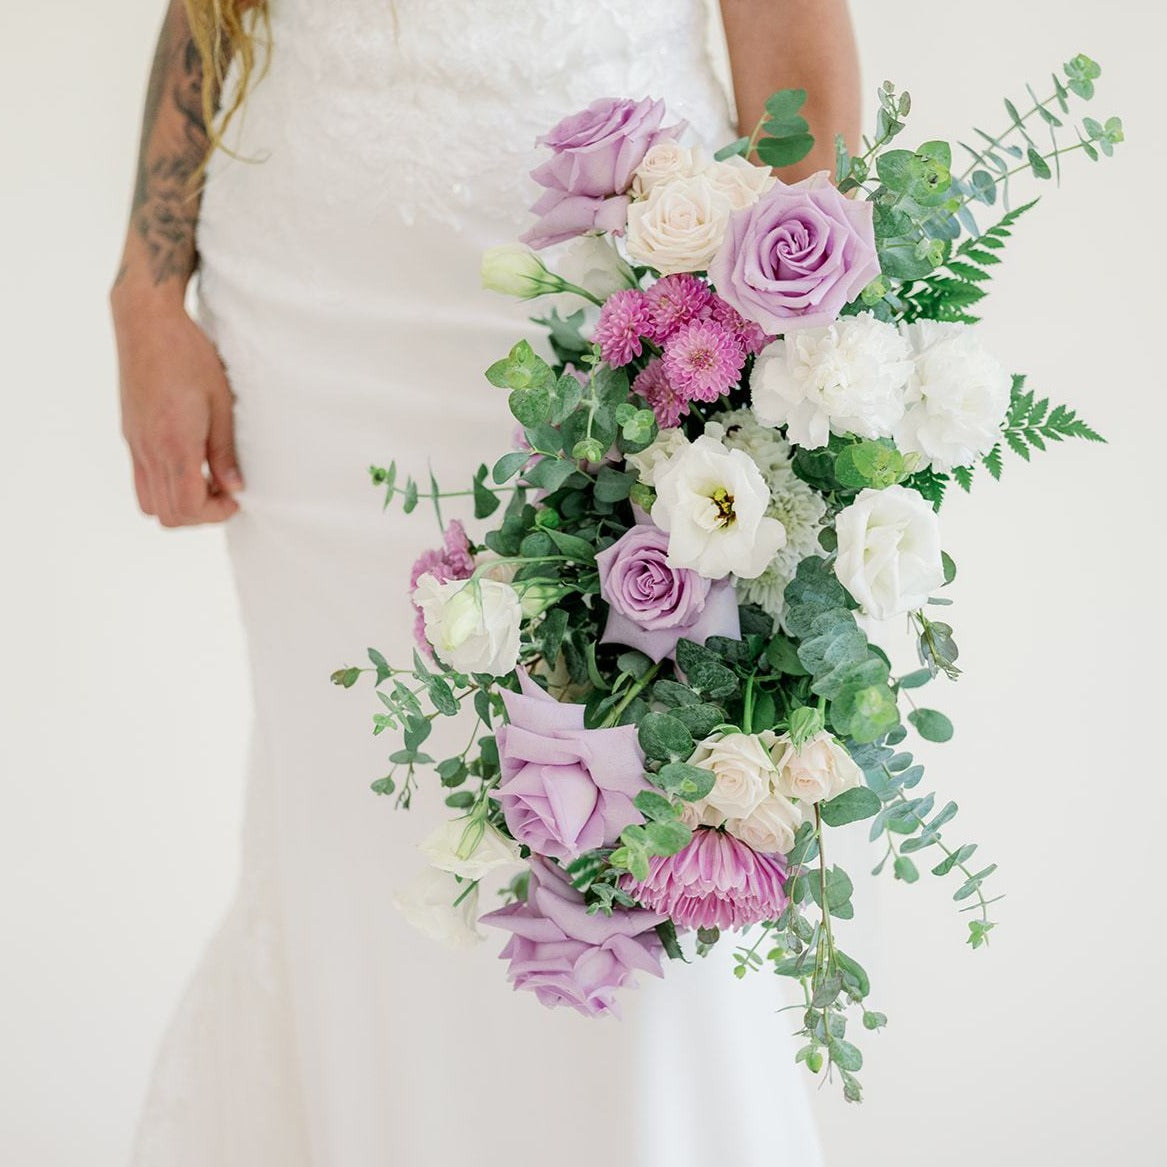 Lavender and cream Bridal Bouquet with Ocean Song, White Lisianthus, White Carnations DIY Flower Moxie